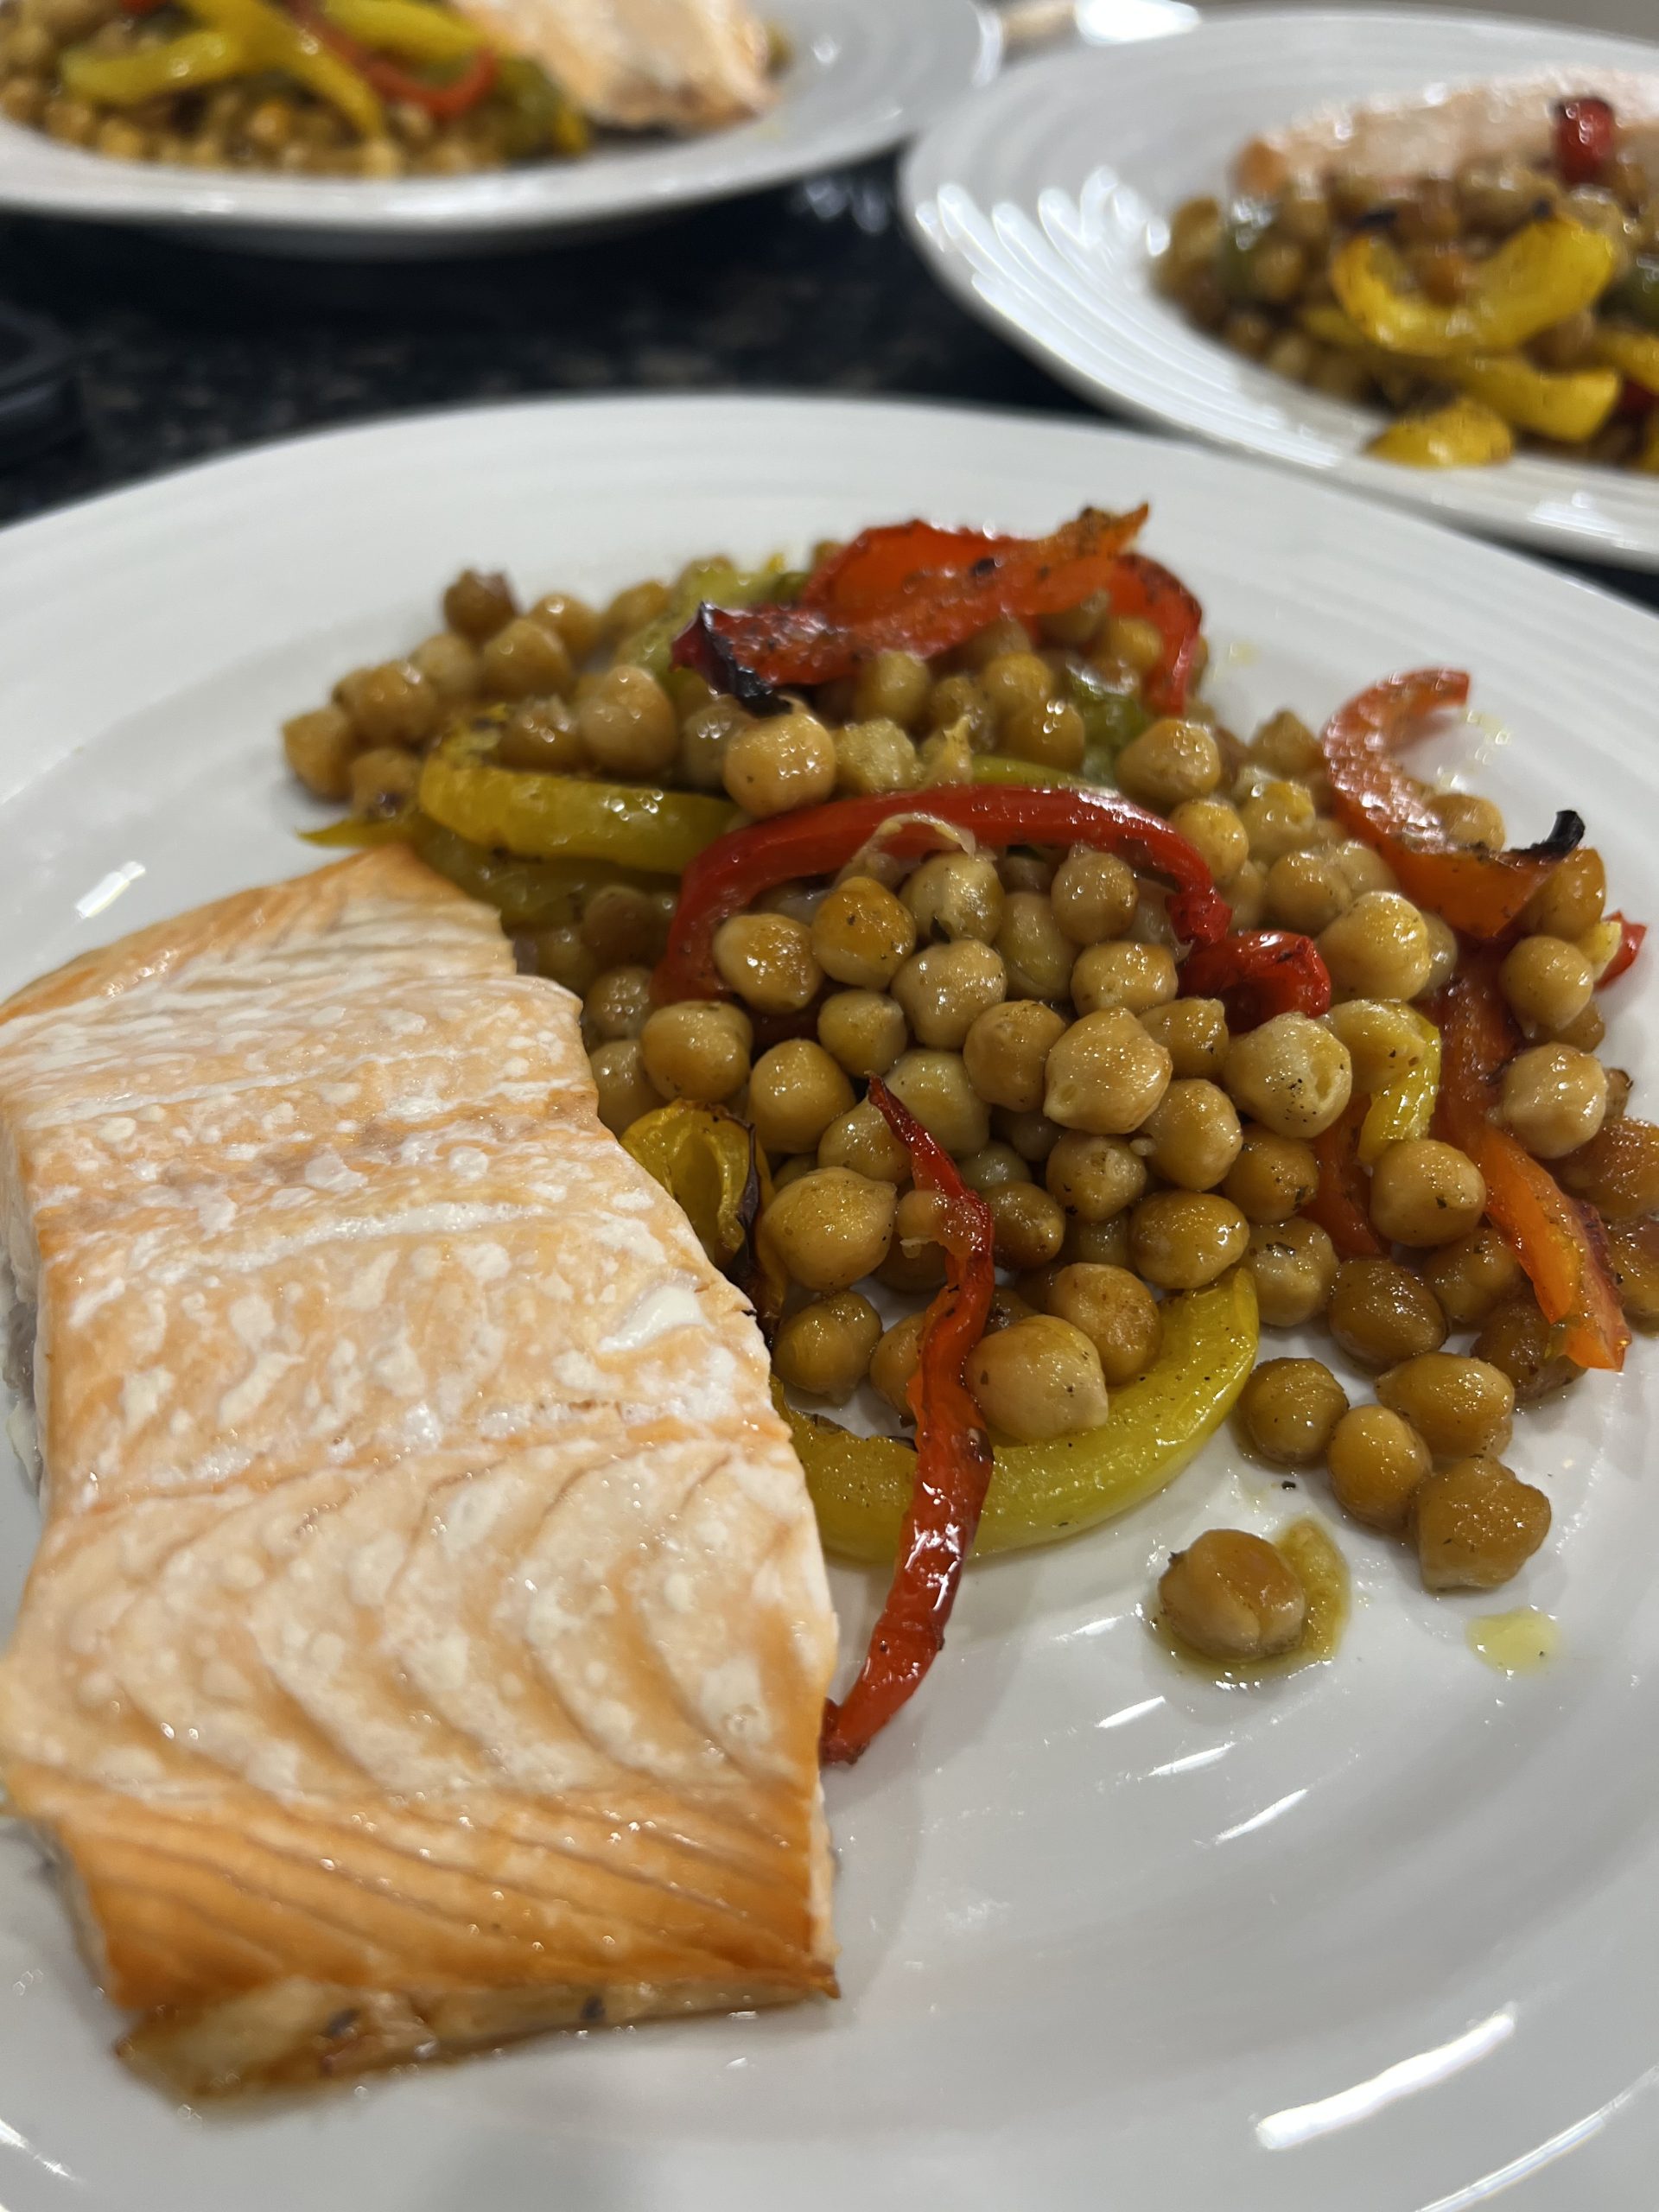 Salmon fillets on plate with chick peas